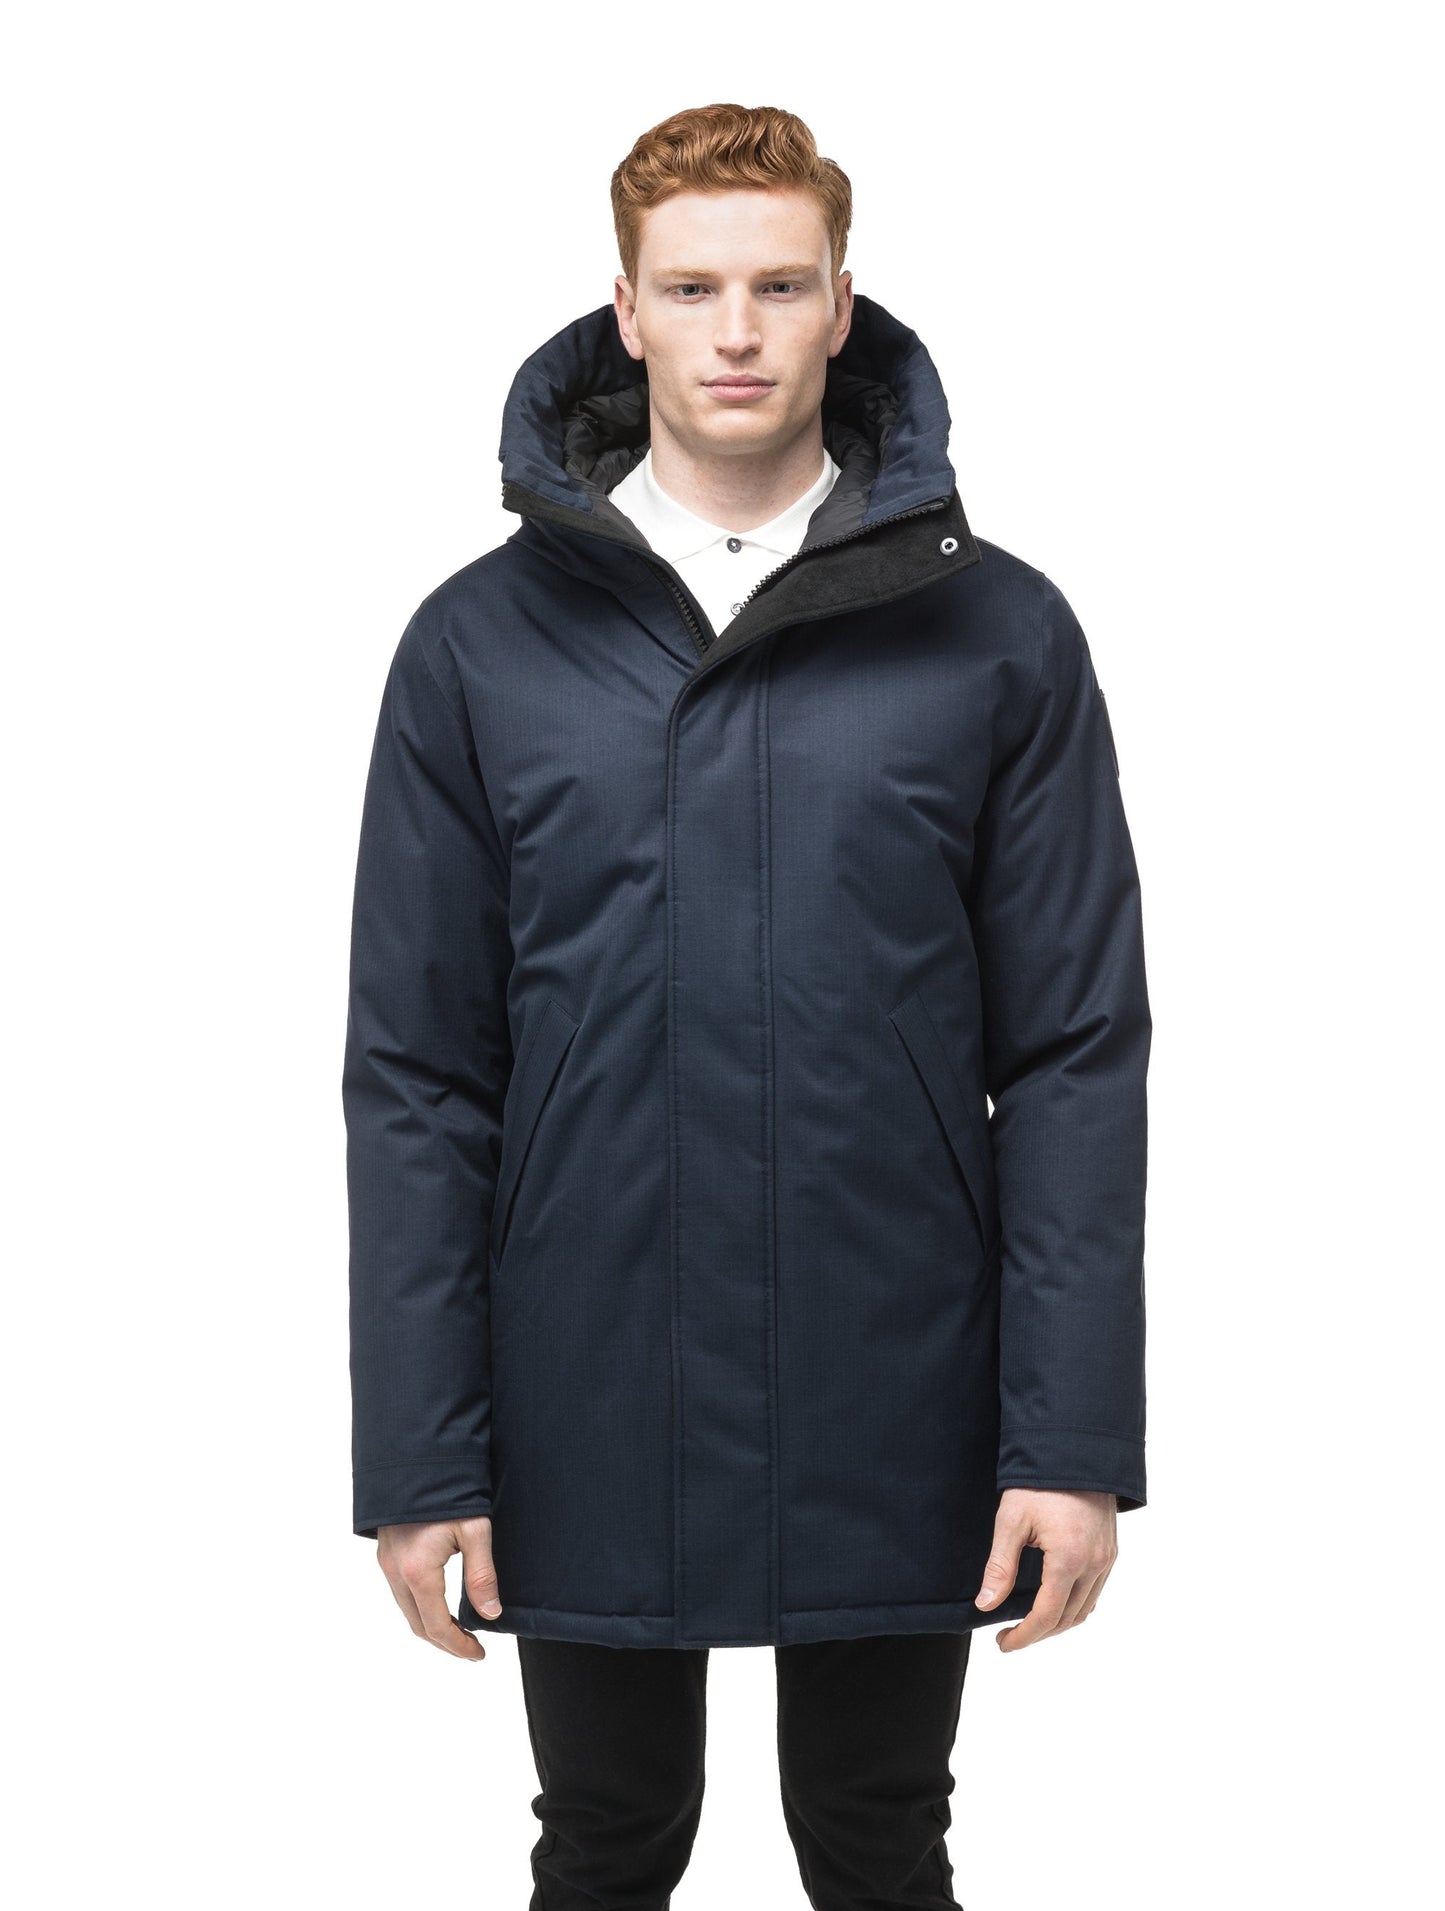 Pierre Men's Jacket in thigh length, Canadian white duck down insulation, non-removable down-filled hood, angled waist pockets, centre-front zipper with wind flap, and elastic ribbed cuffs, in Navy